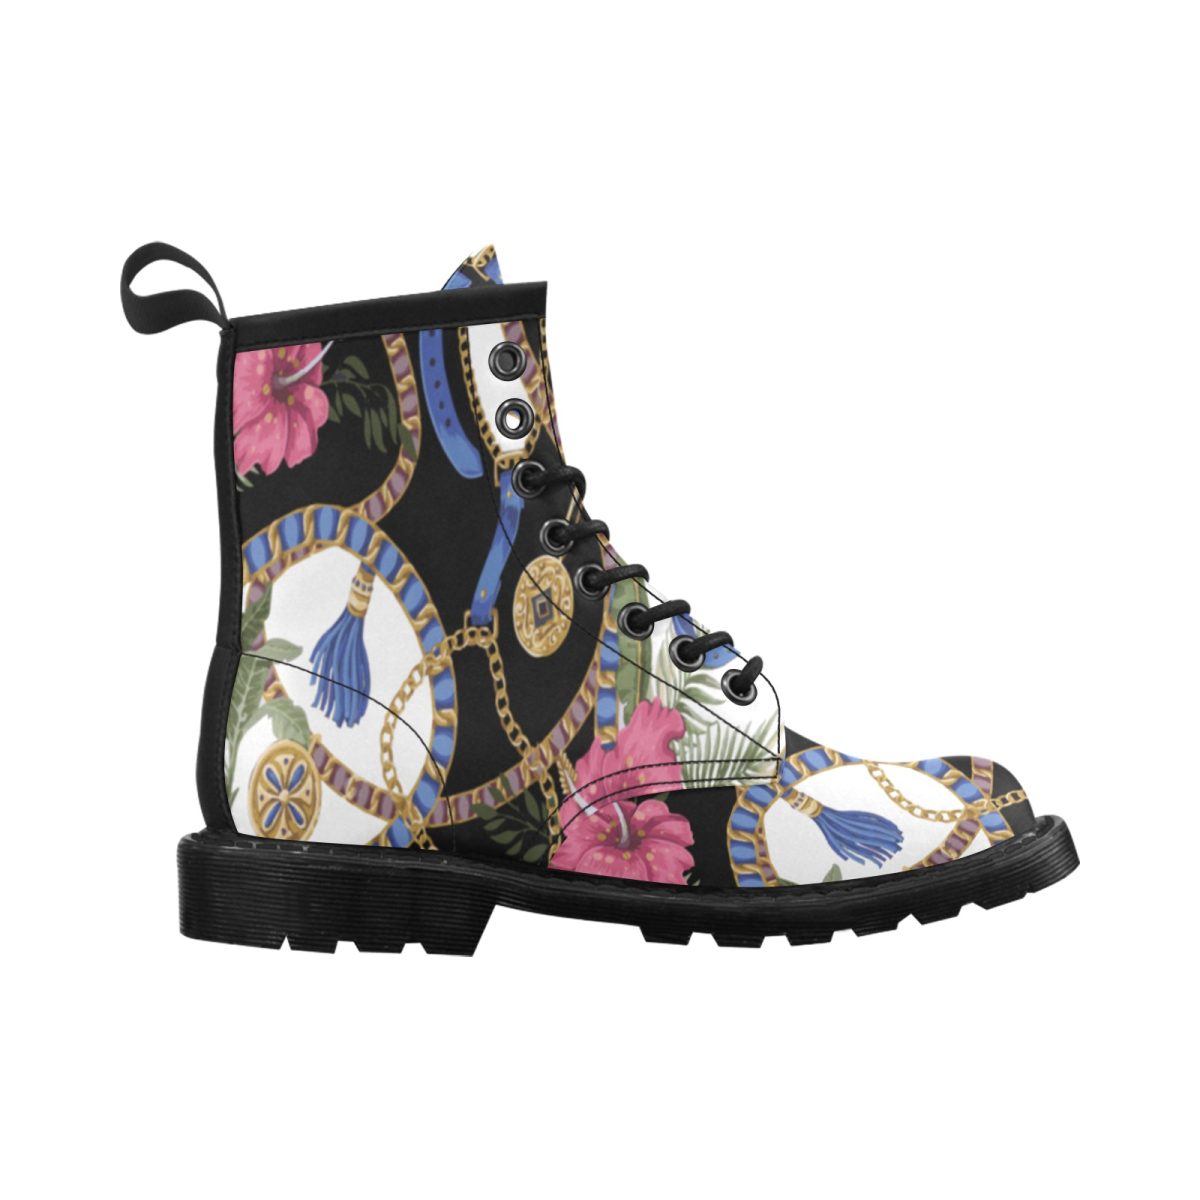 Boots | danner boots cowgirl boots ugg mini snow boots